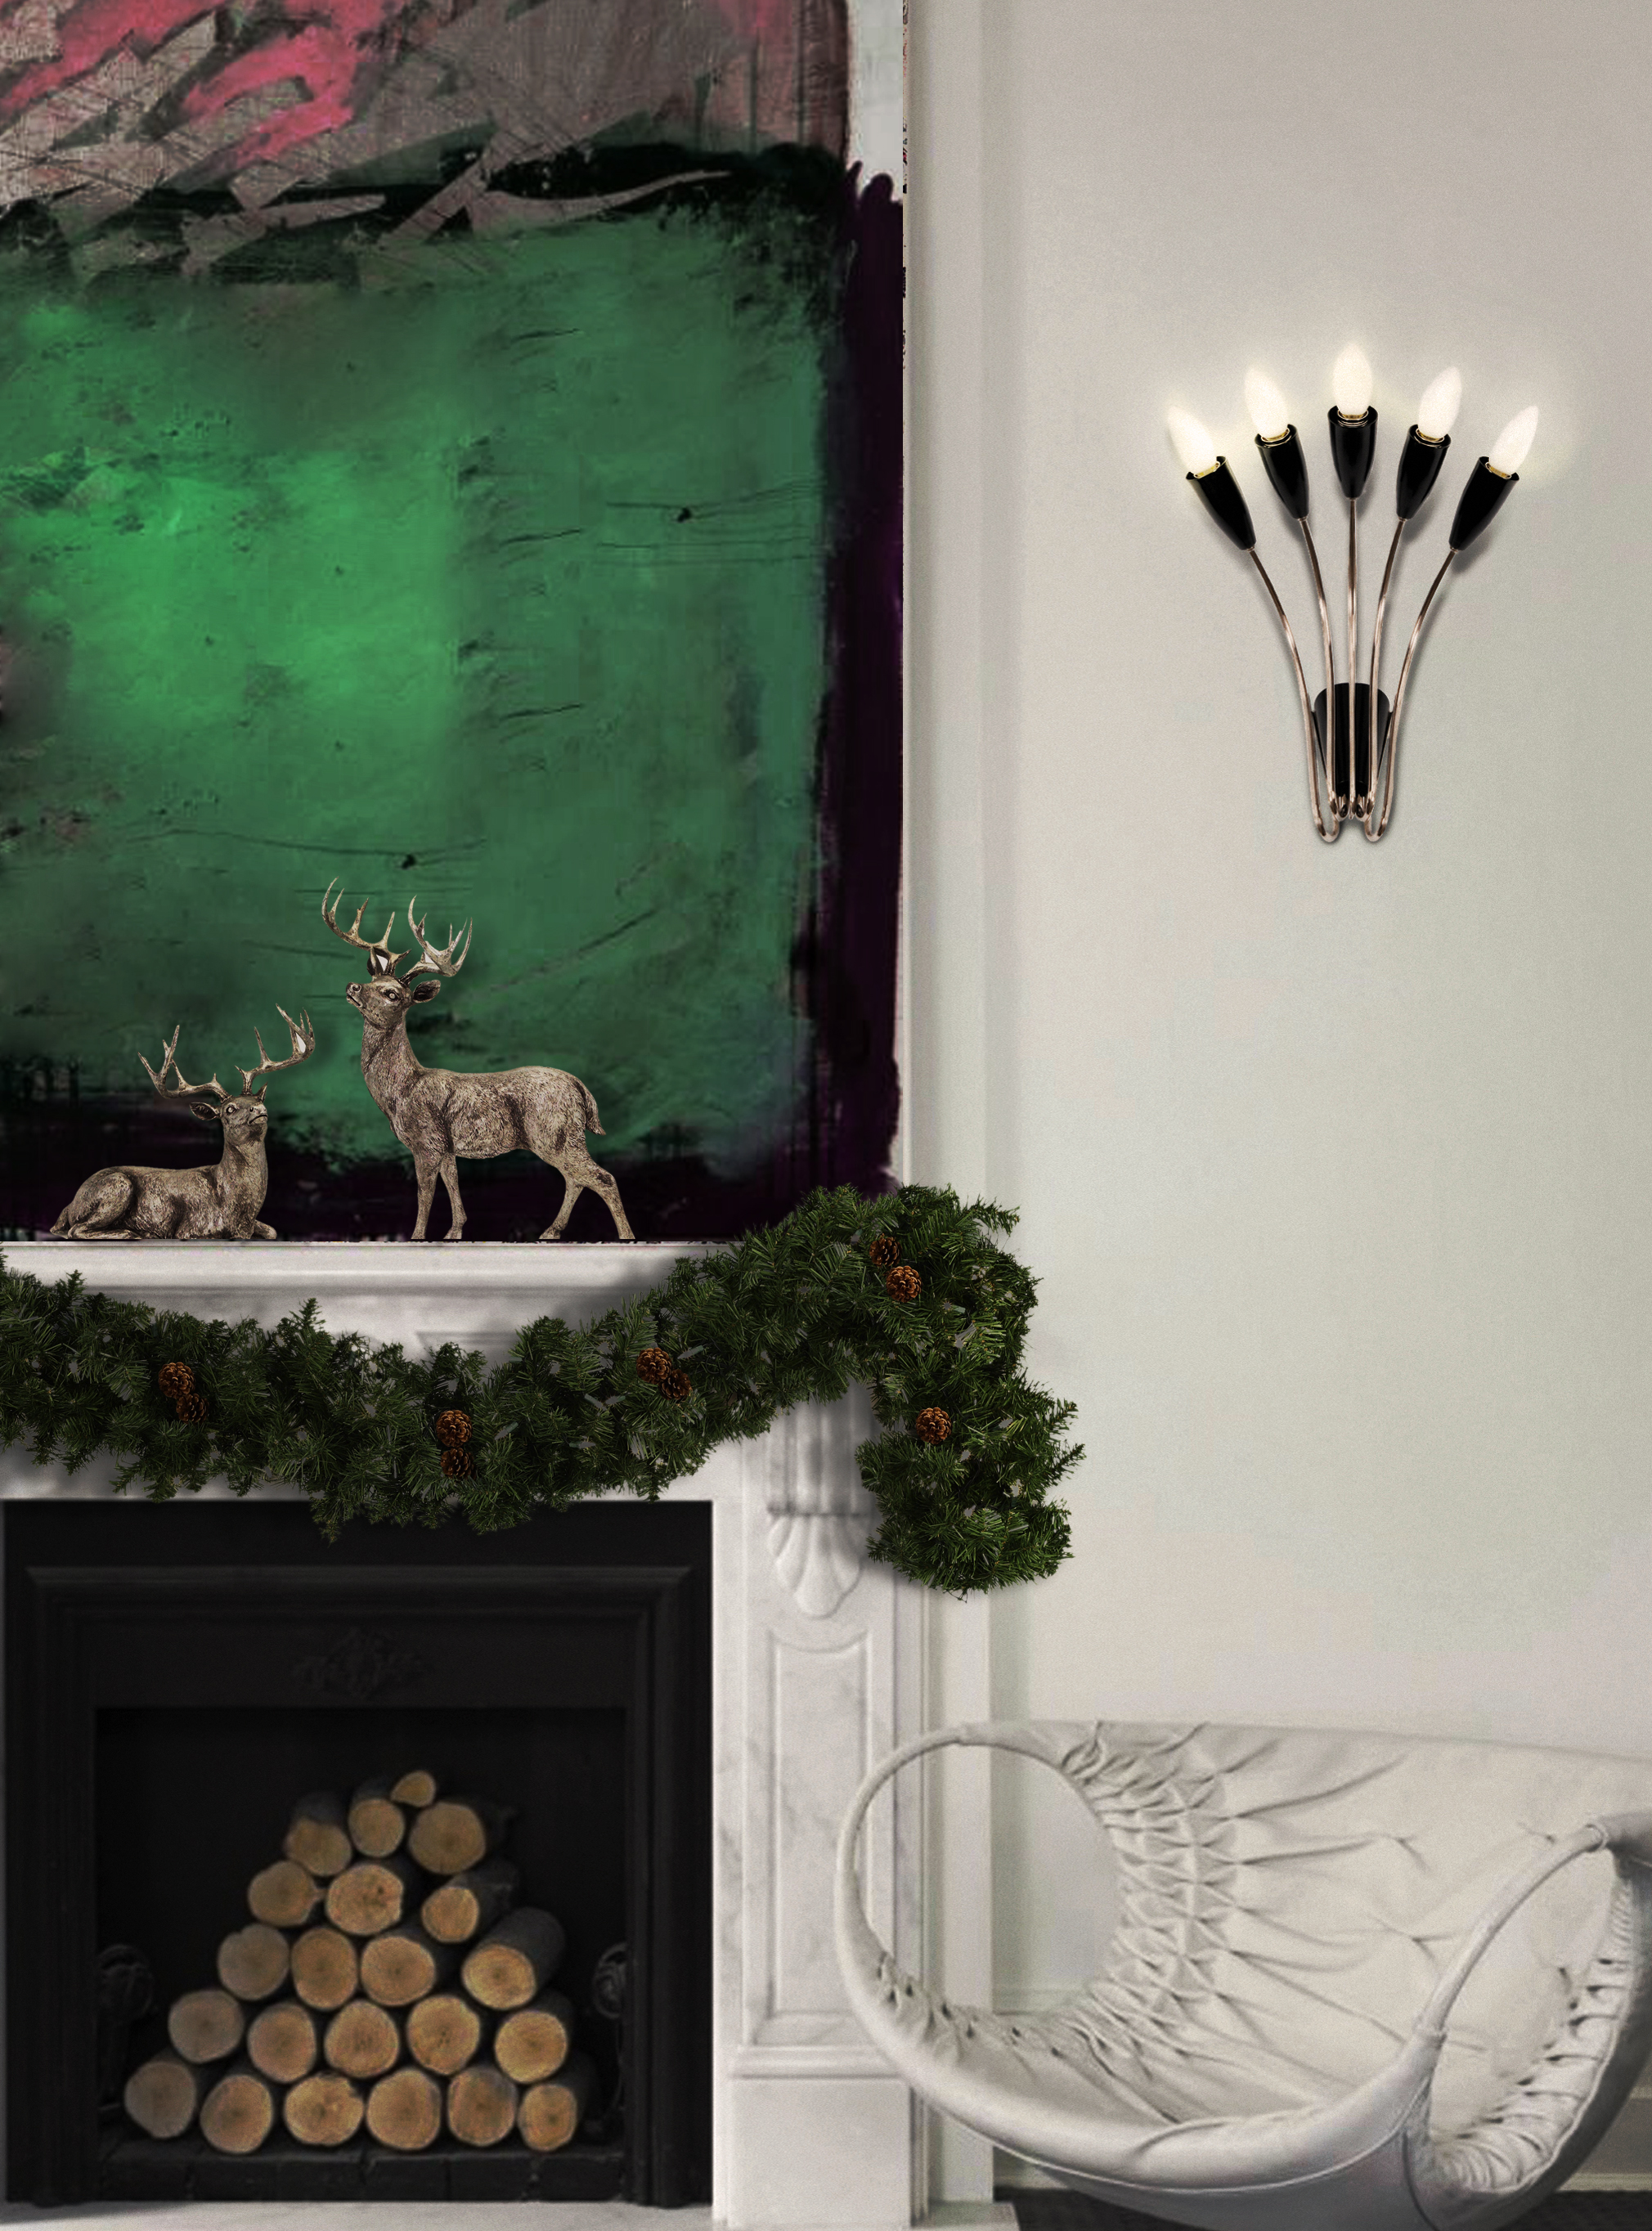 Let's Get Festive With This Amazing Mid-Century Modern Lighting Ideas! 5